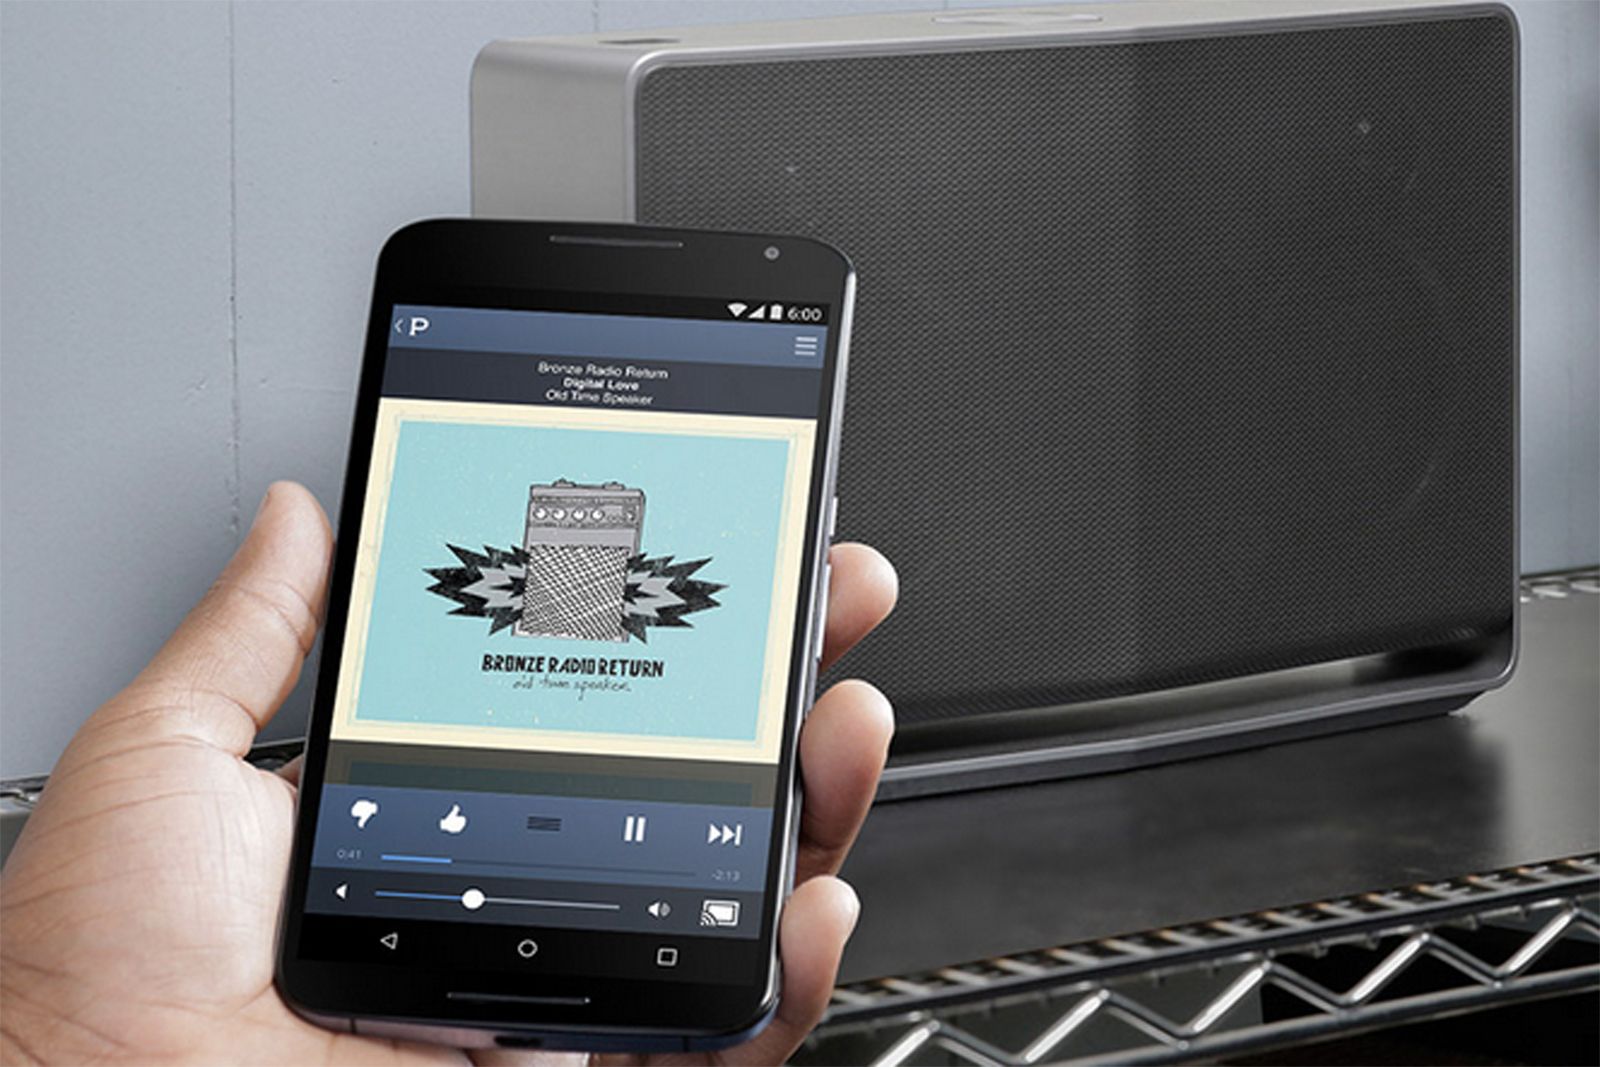 what is google cast for audio what speakers support it and why does it matter image 1